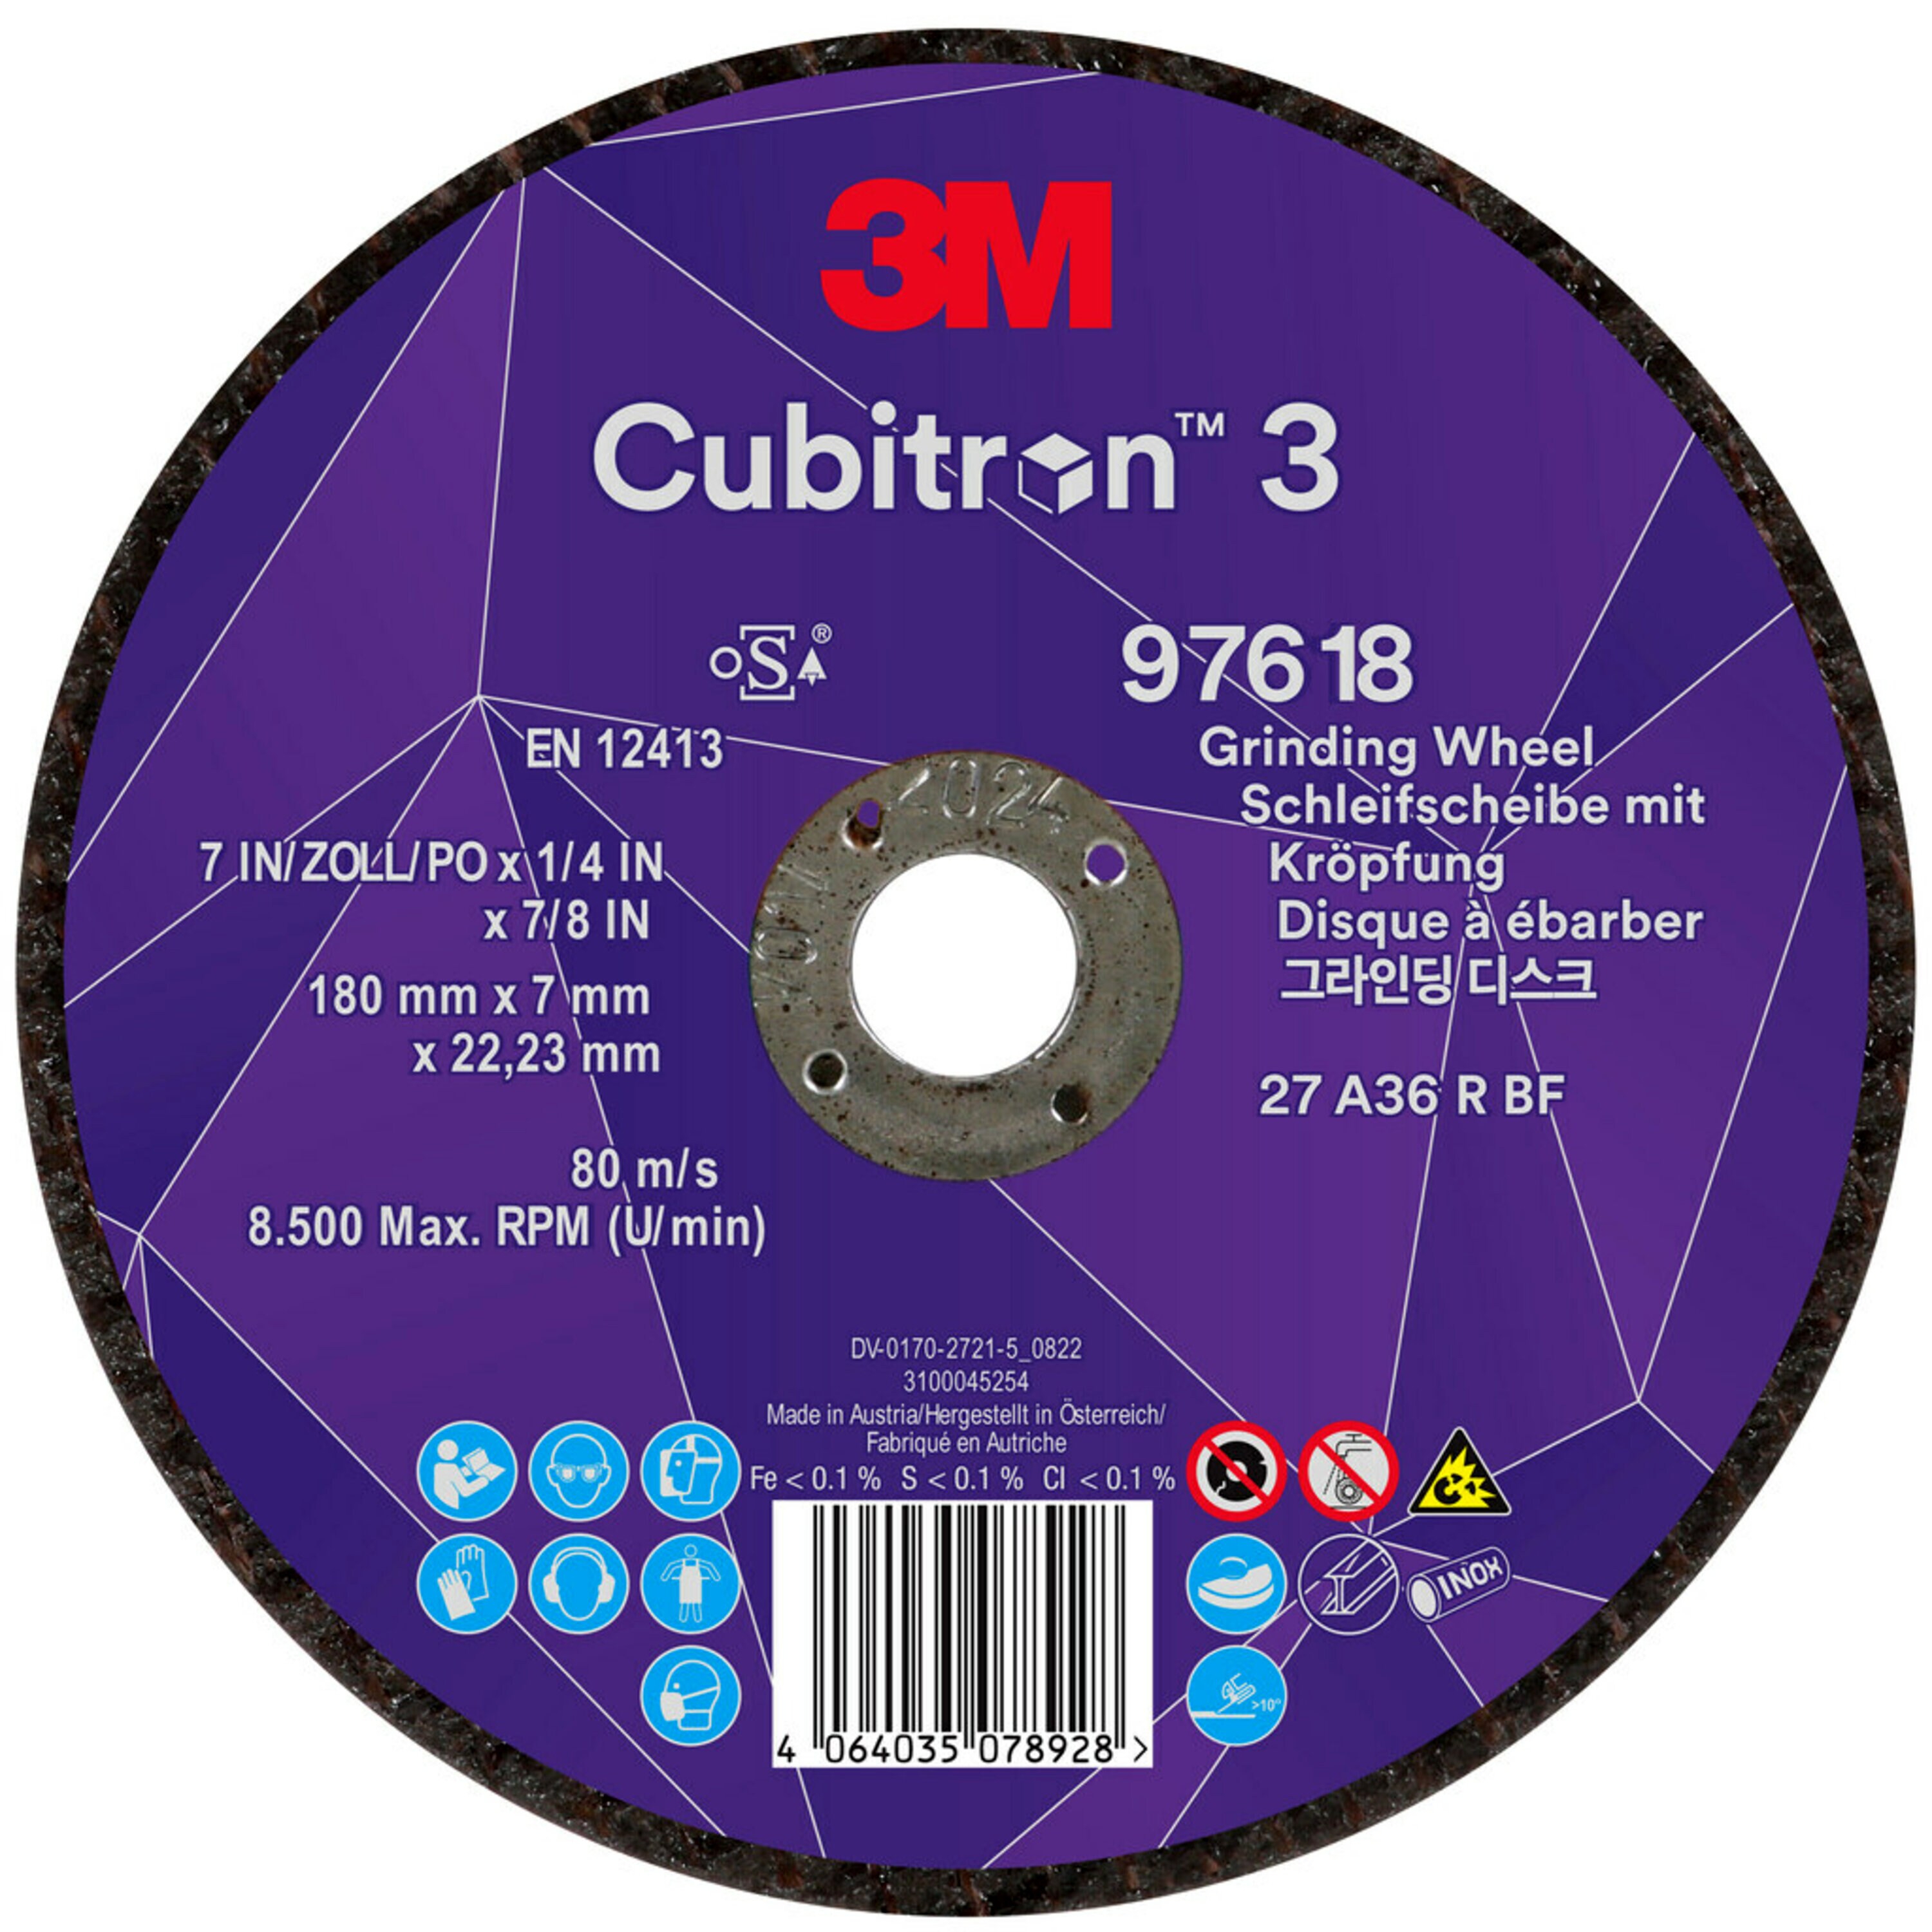 3M Cubitron 3 grinding disc, 180 mm, 7.0 mm, 22.23 mm, 36+, type 27, especially for gouging # 97618